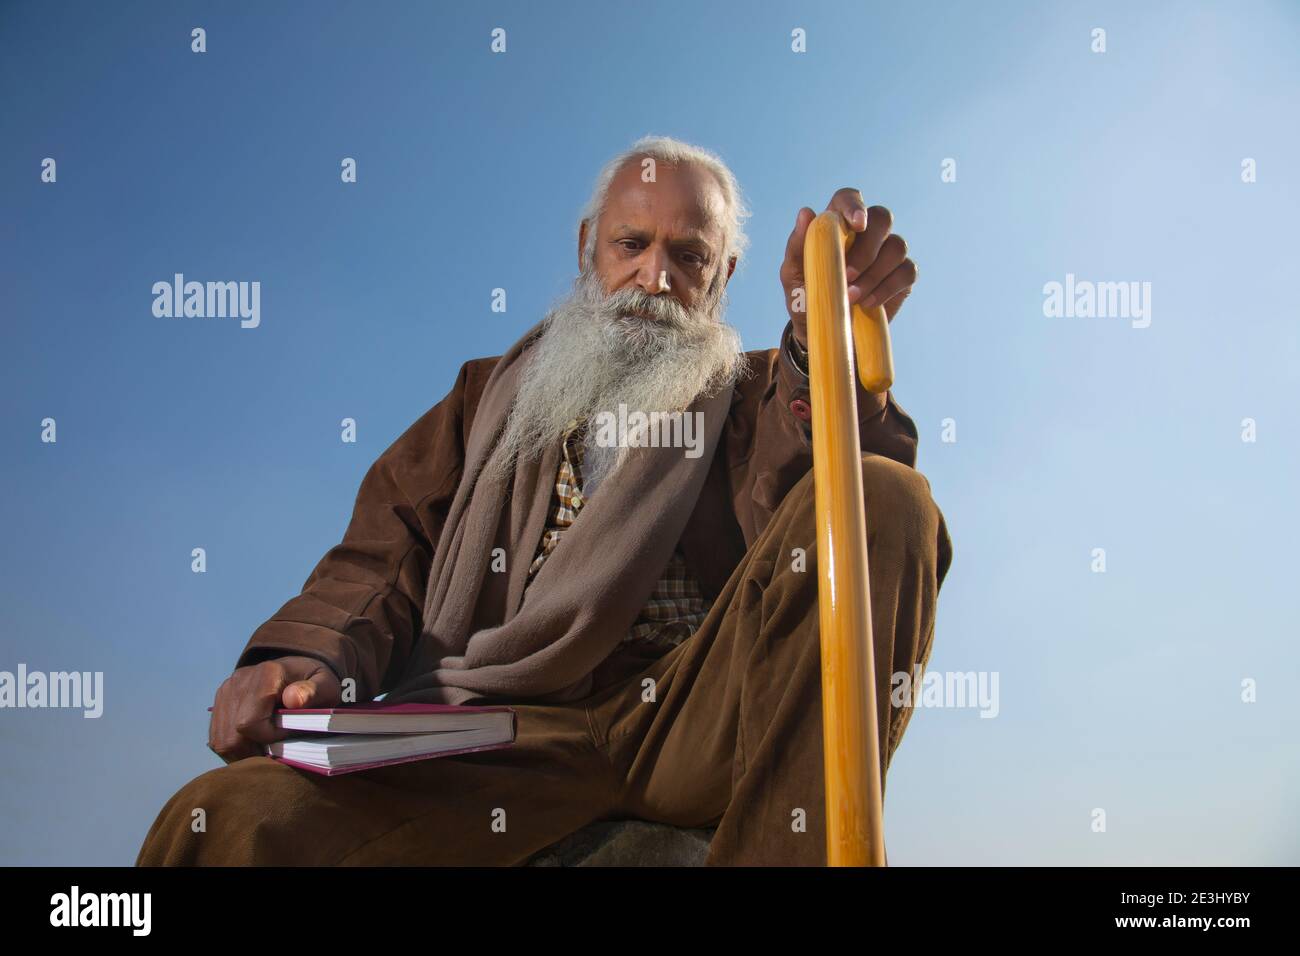 AN OLD MAN WITH LONG BEARD SITTING WITH BOOK AND THINKING Stock Photo